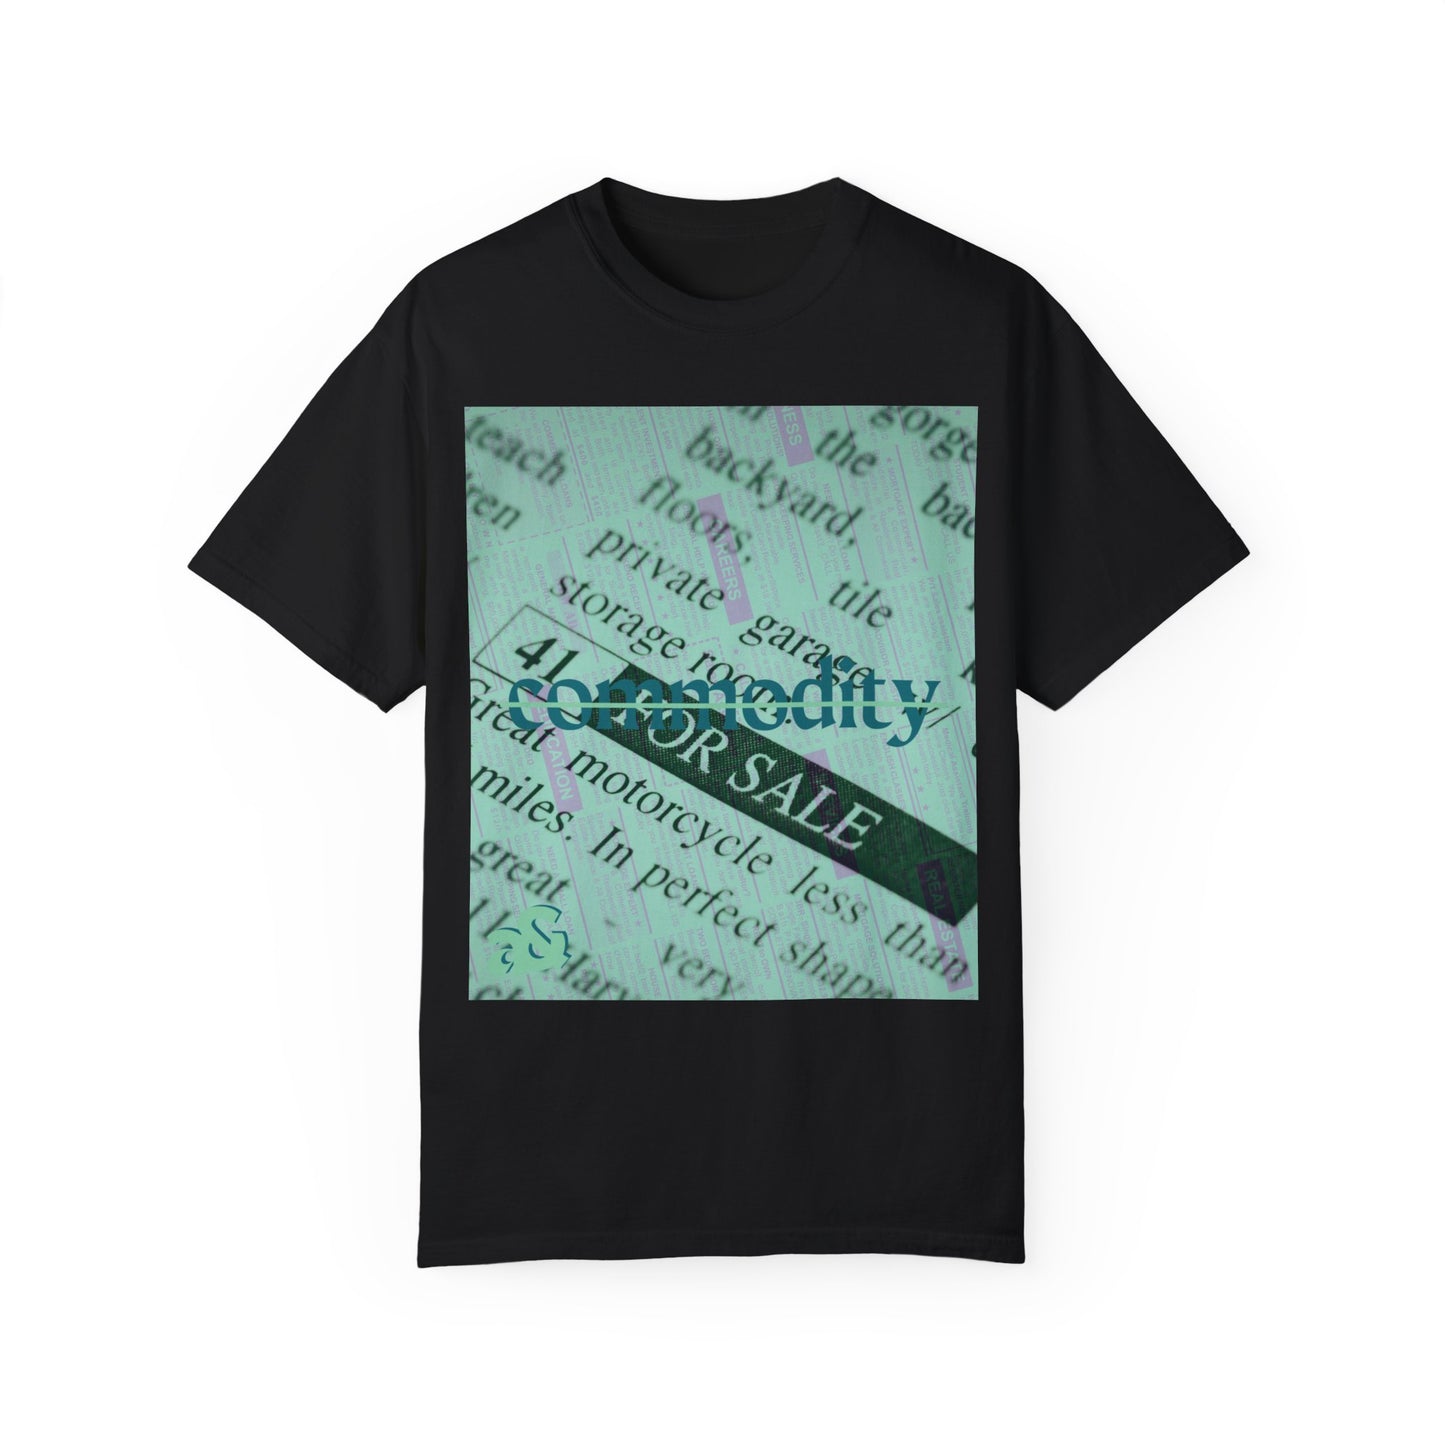 Not Your Commodity T-shirt